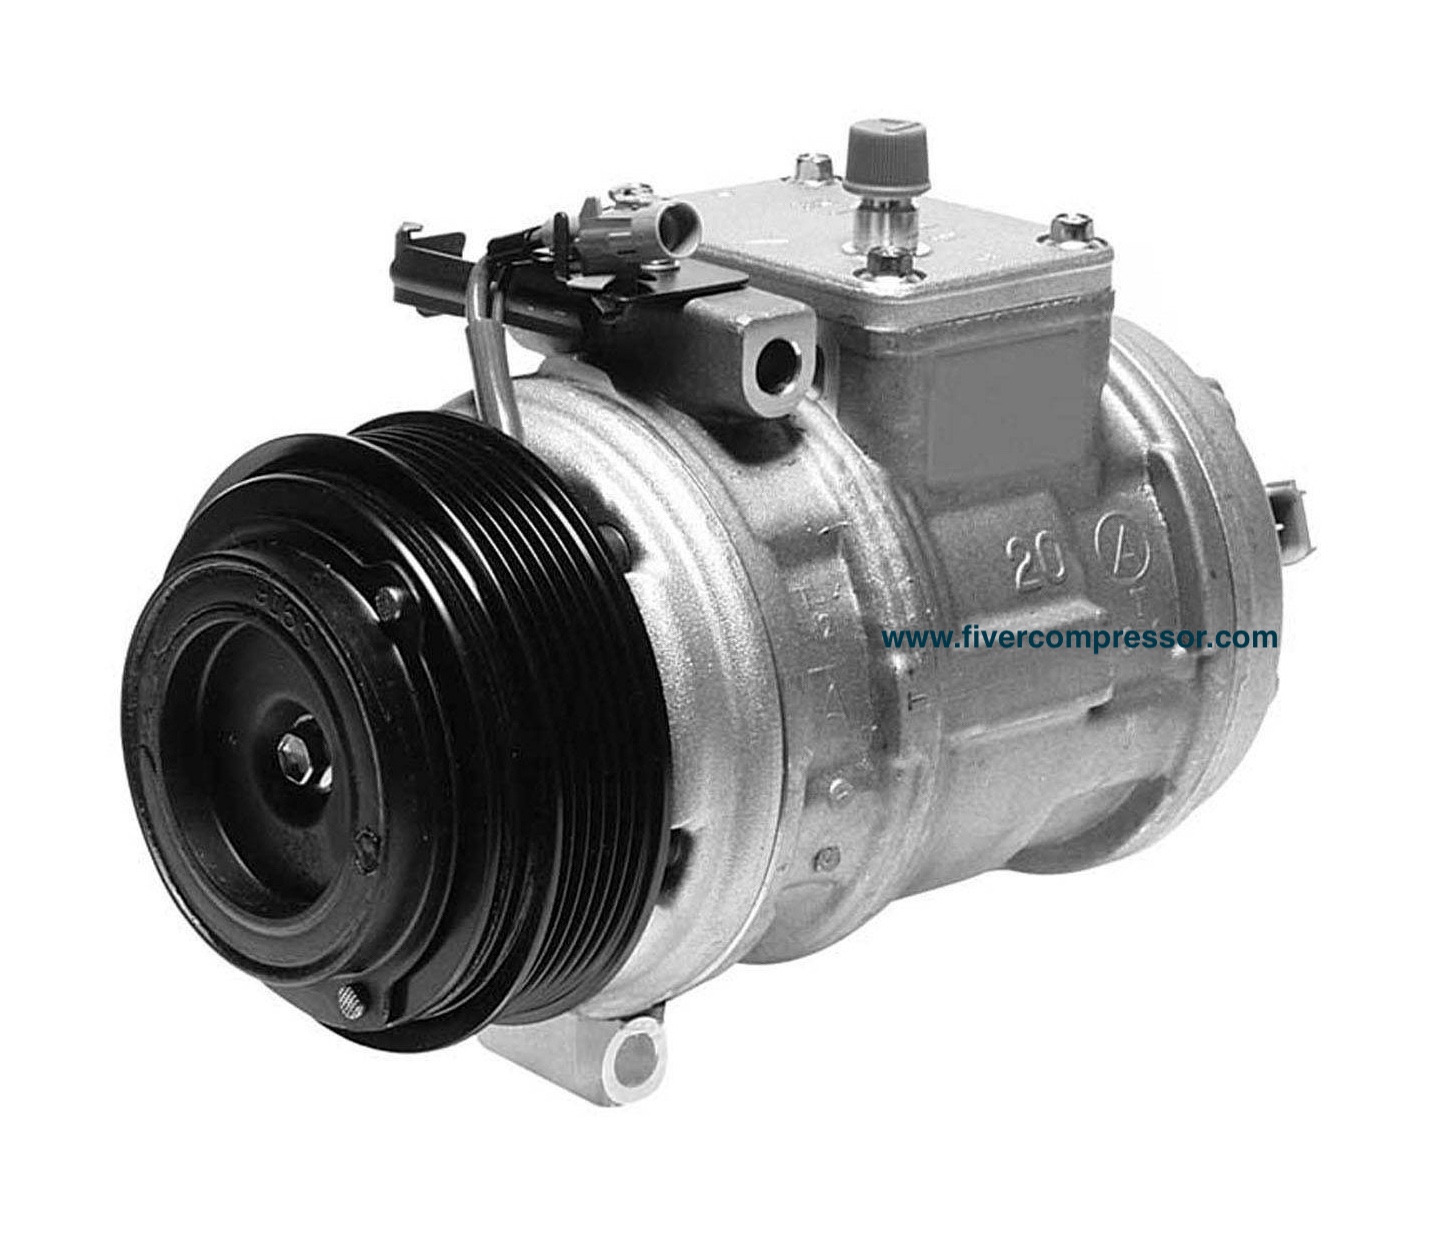 Air conditioning Compressor 8831050040, 8831050041, 8832050040, 8832050041, Auto Cooler for Lexus LS400(UCF10) and Toyota Celsior (UCF10/UCF11) 1989-1994 